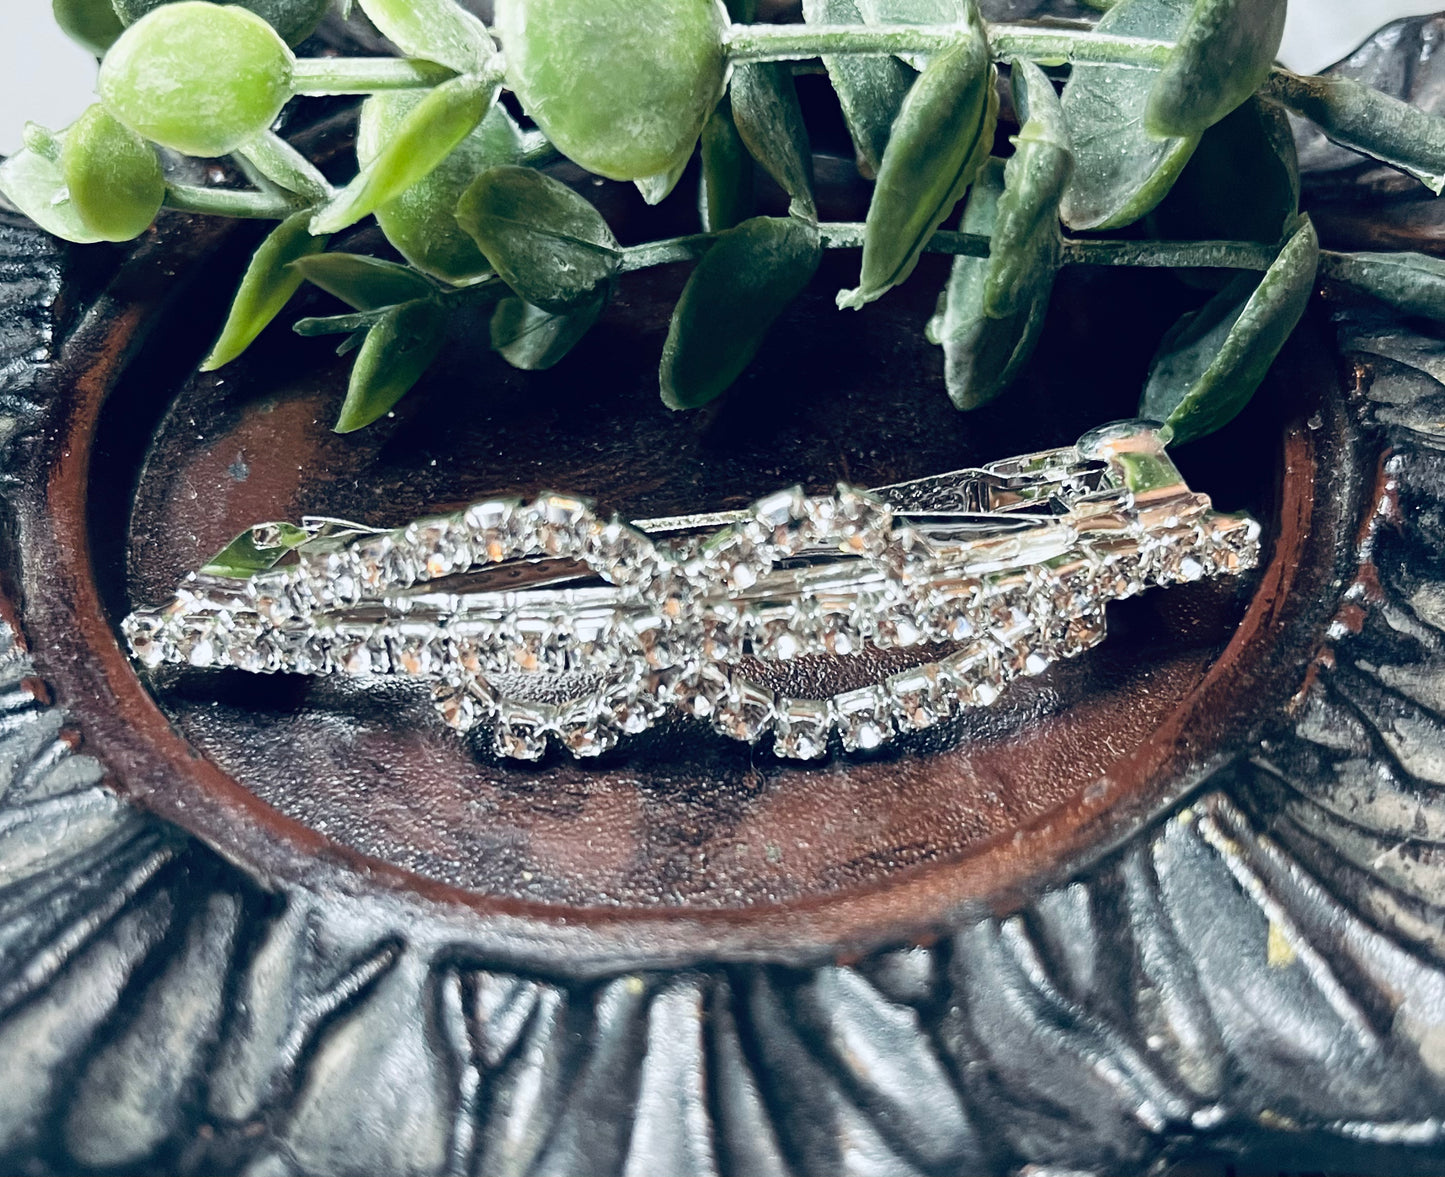 Clear Crystal rhinestone barrette approximately 3.0” silver tone formal hair accessories gift wedding bridesmaid